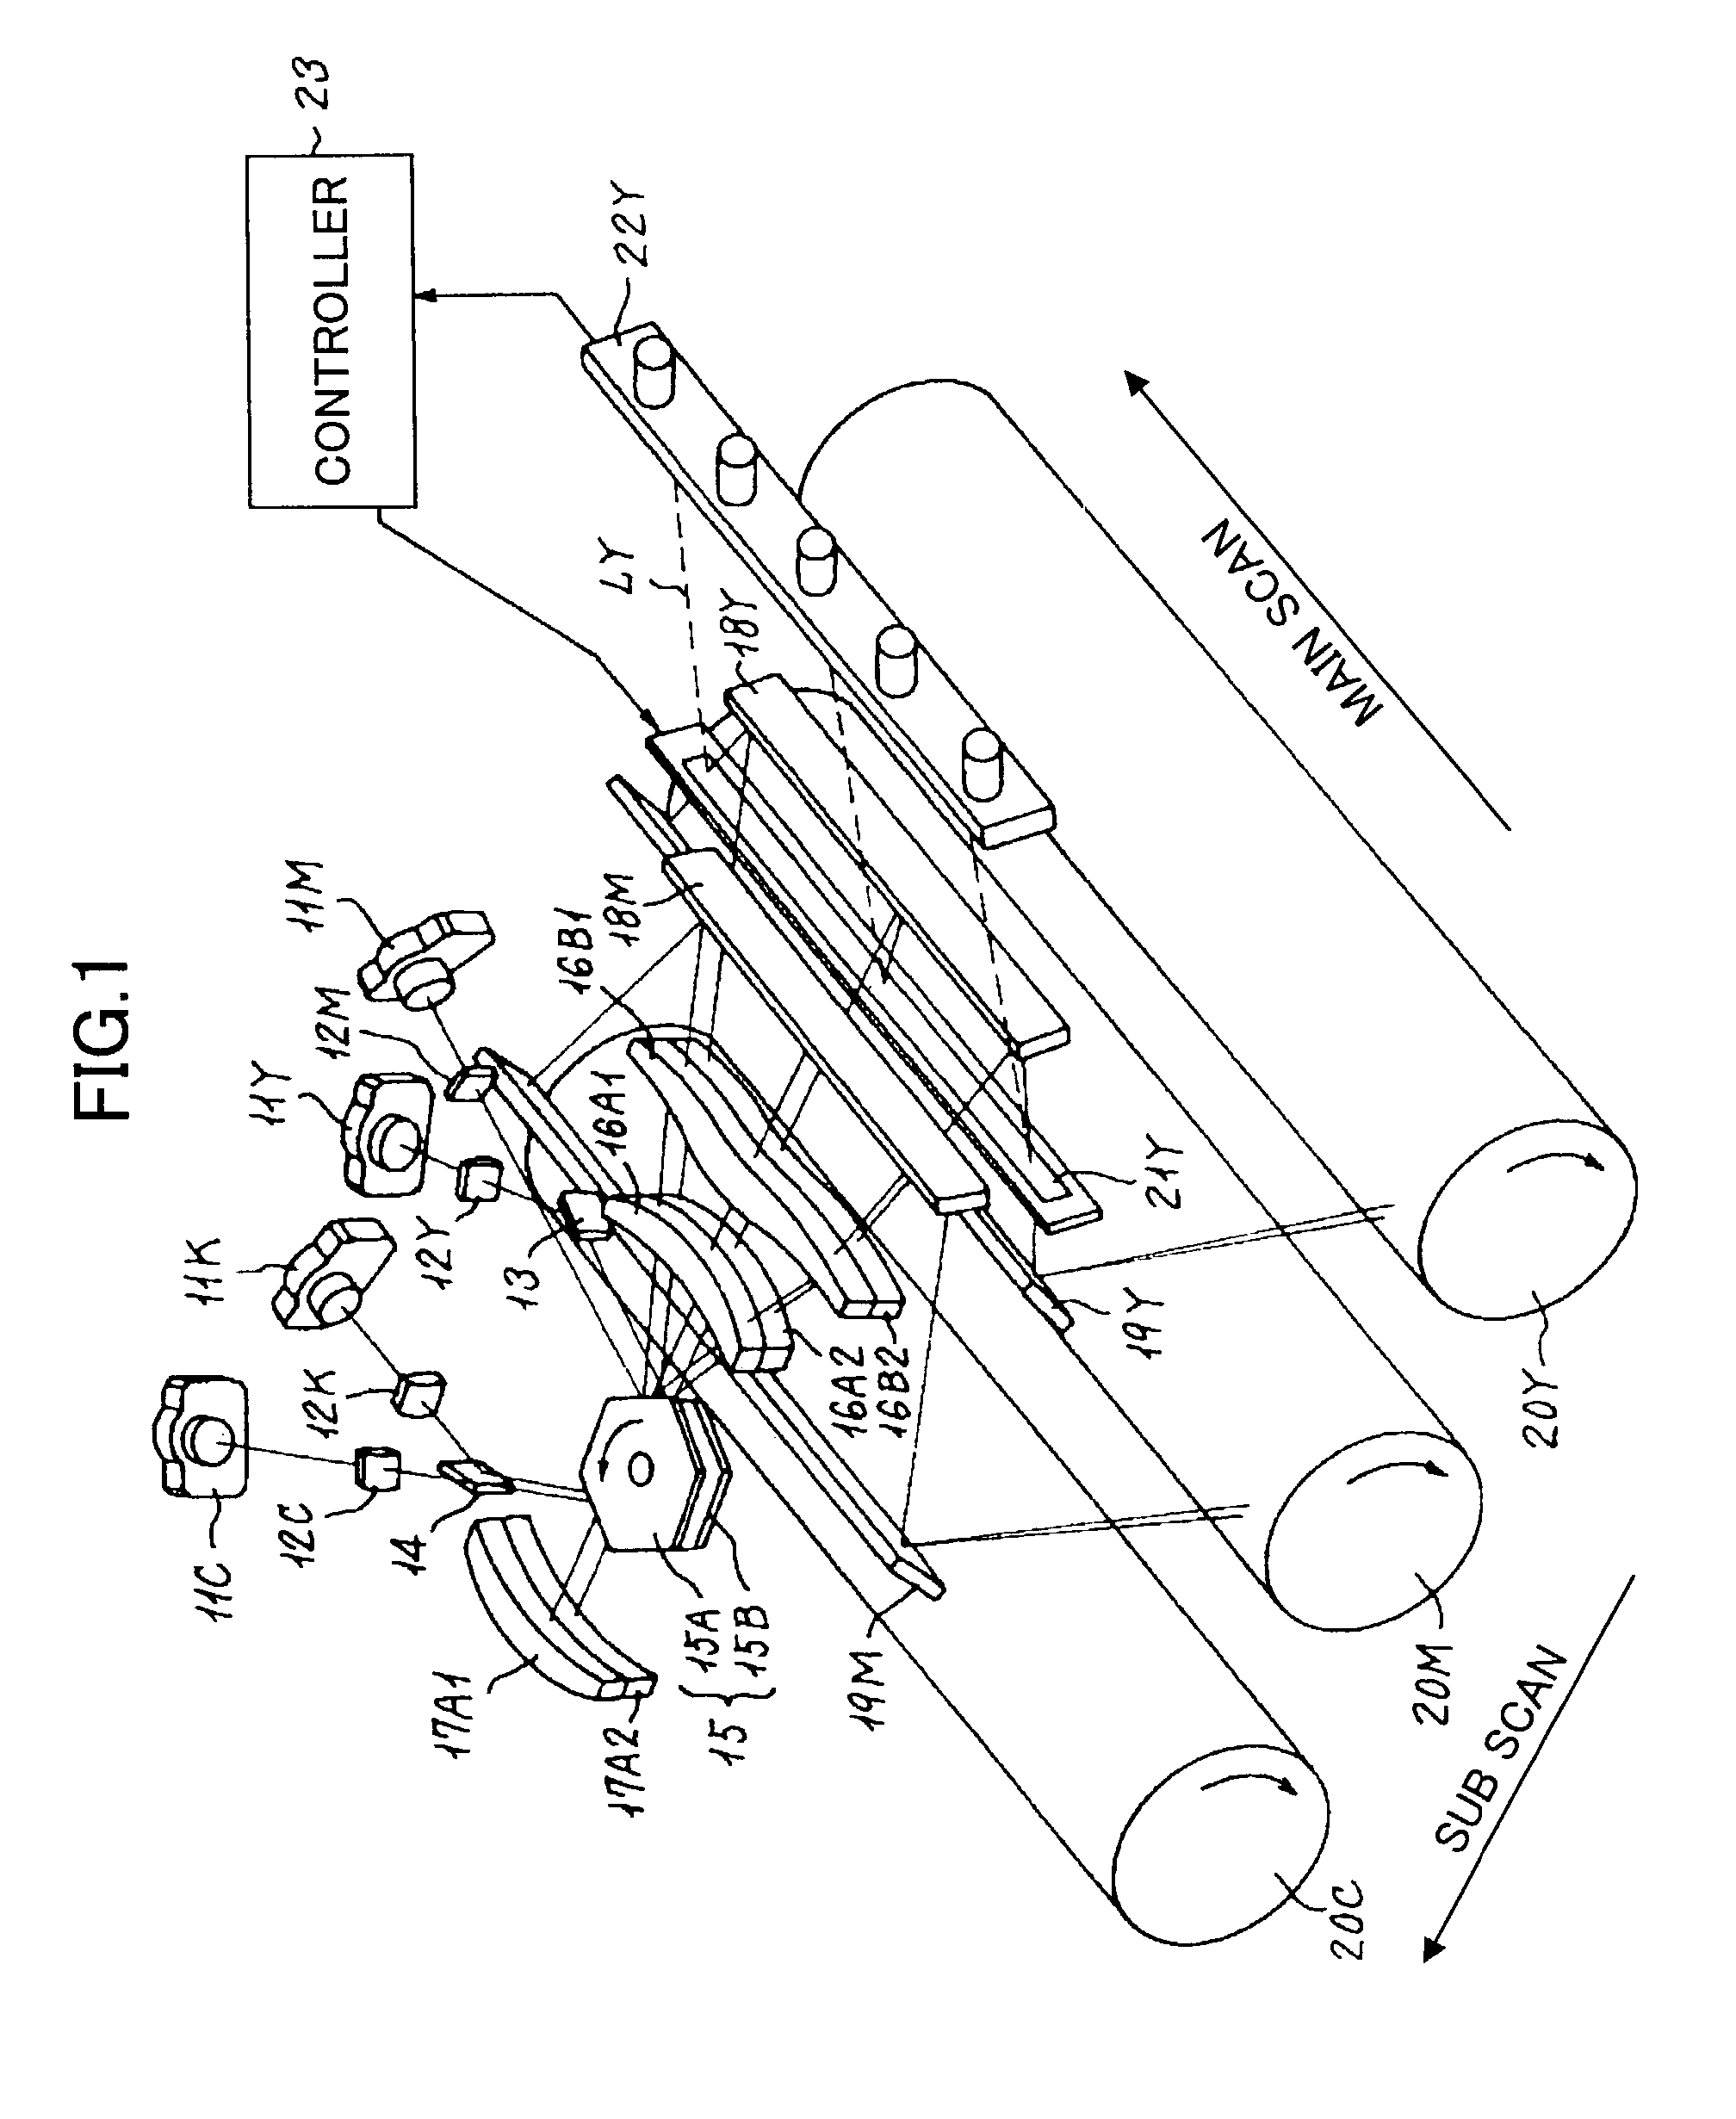 Image forming system employing effective optical scan-line control device